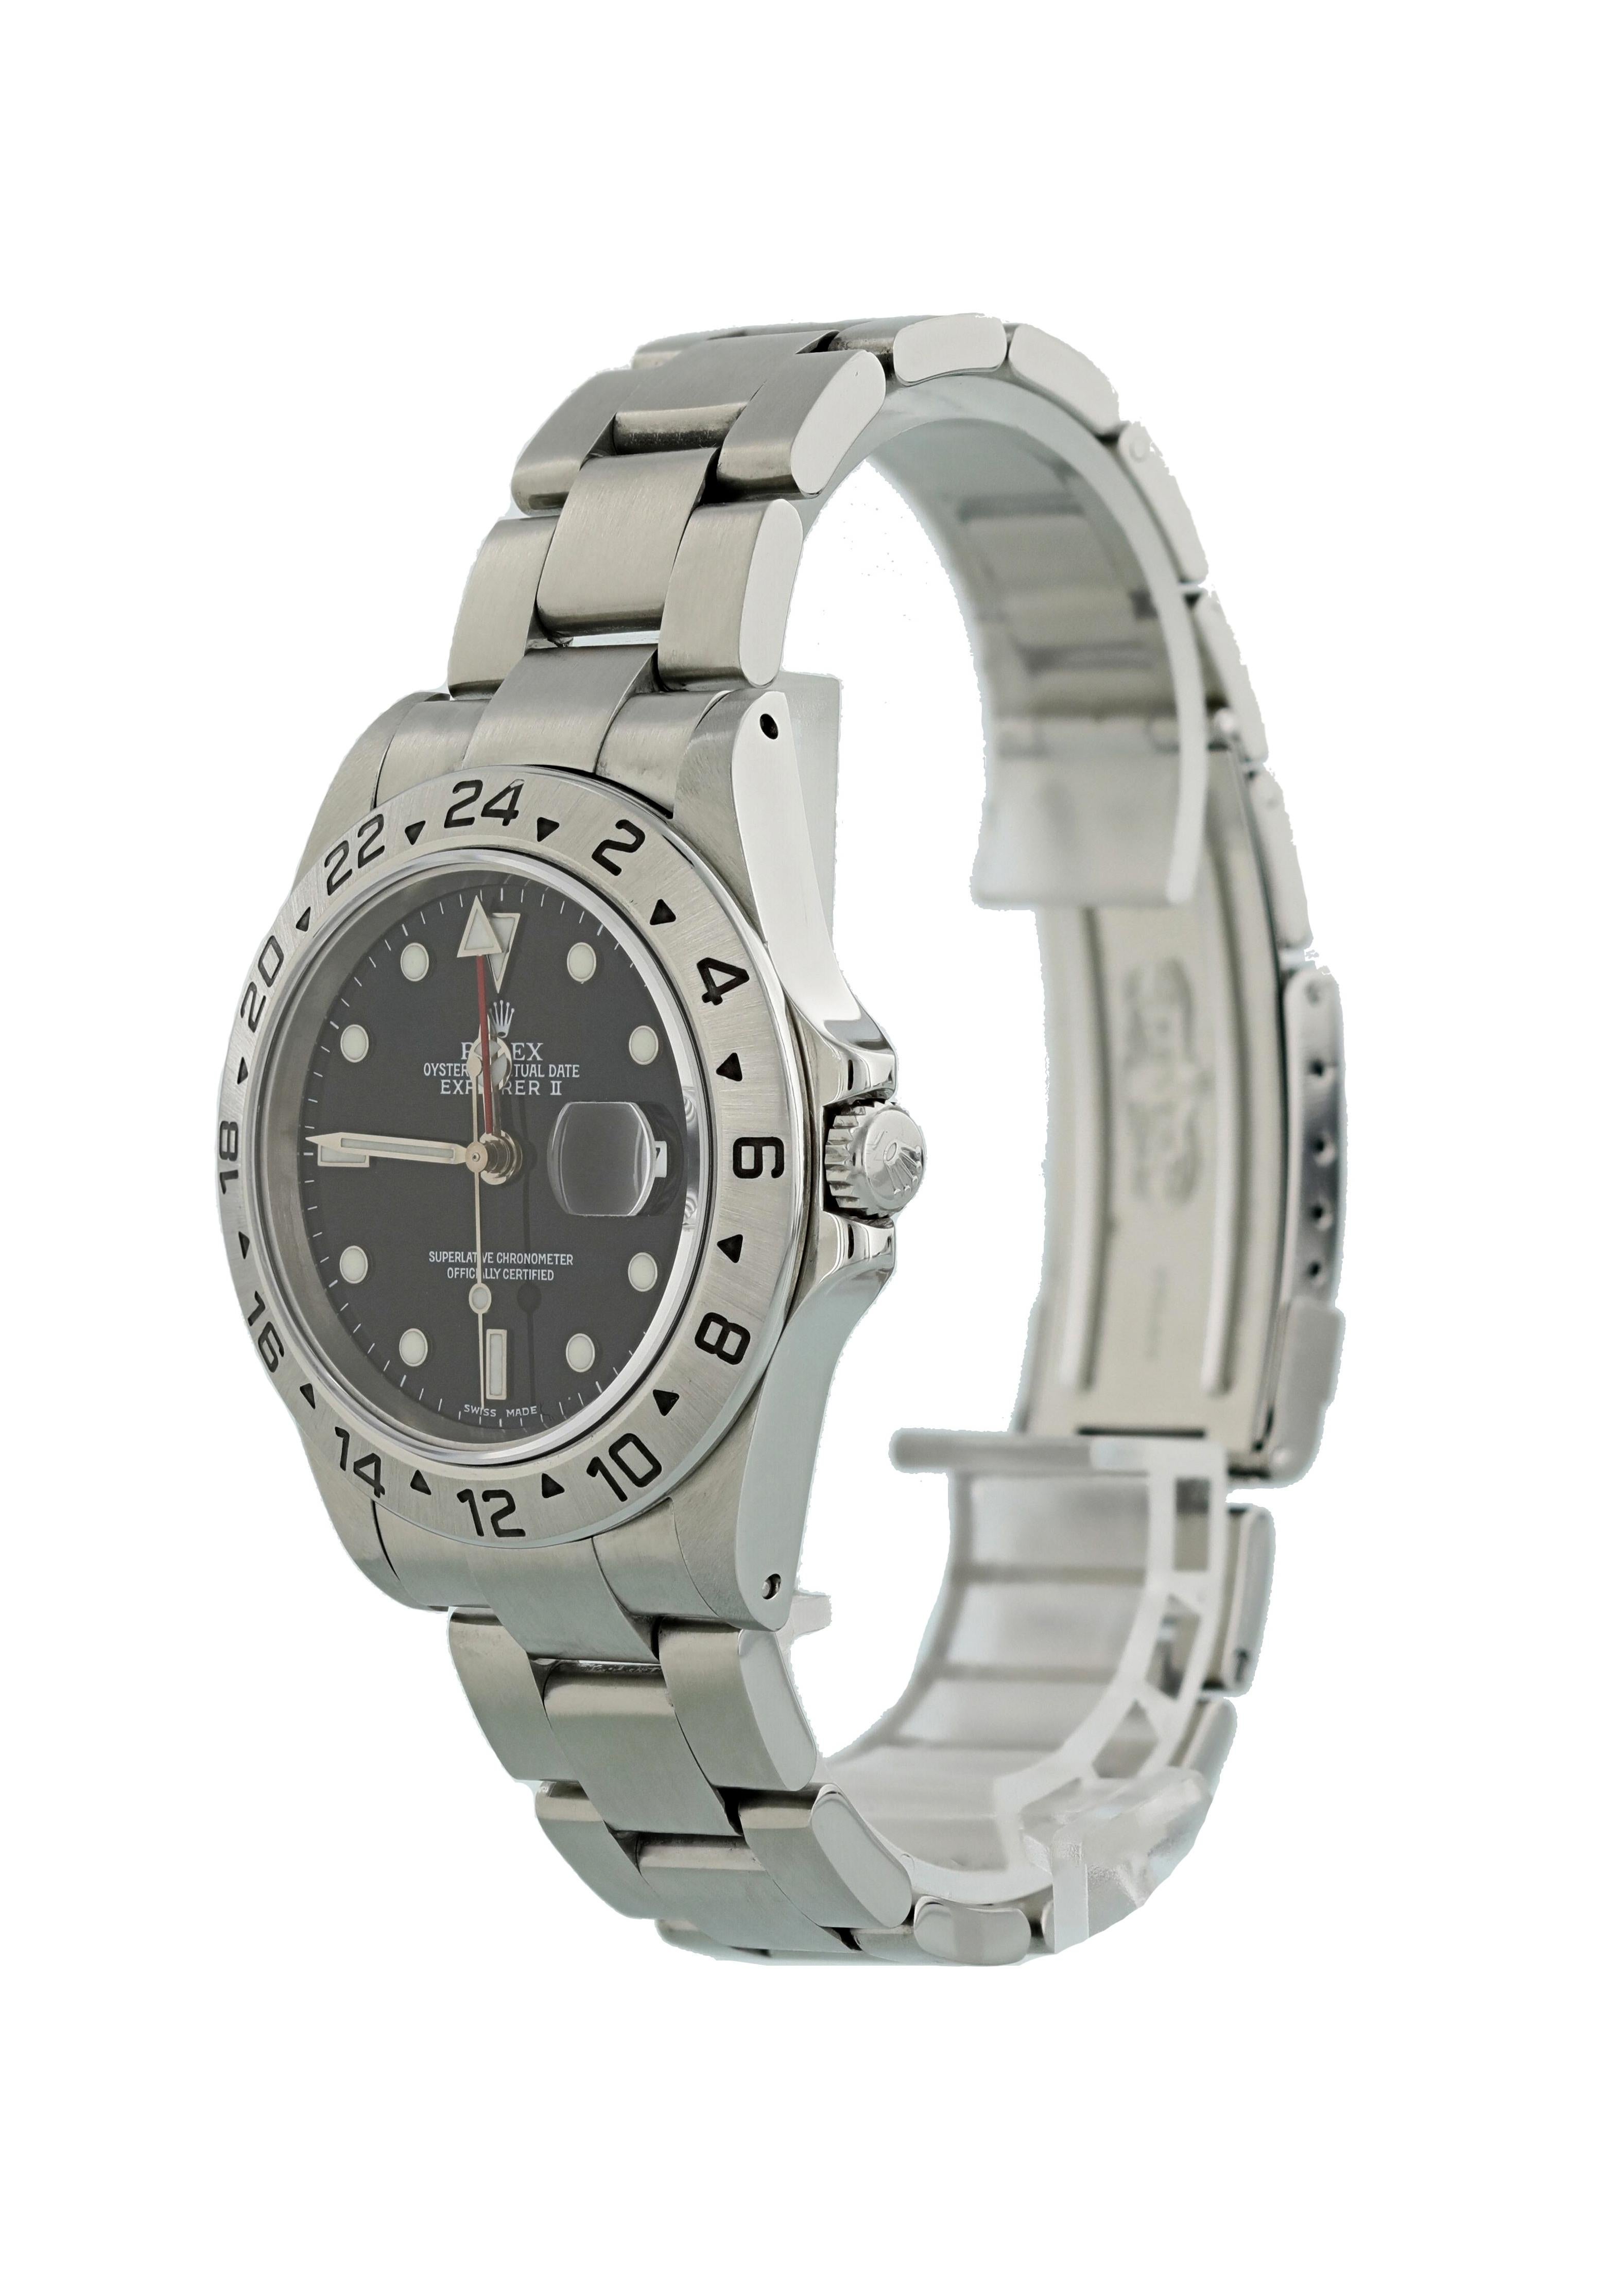 Rolex Explorer II 16570 Men Watch. 
40mm Stainless Steel case. 
Stainless Steel Stationary bezel. 
Black dial with Luminous Steel hands and index, dot hour markers. 
Minute markers on the outer dial. 
Date display at the 3 o'clock position.